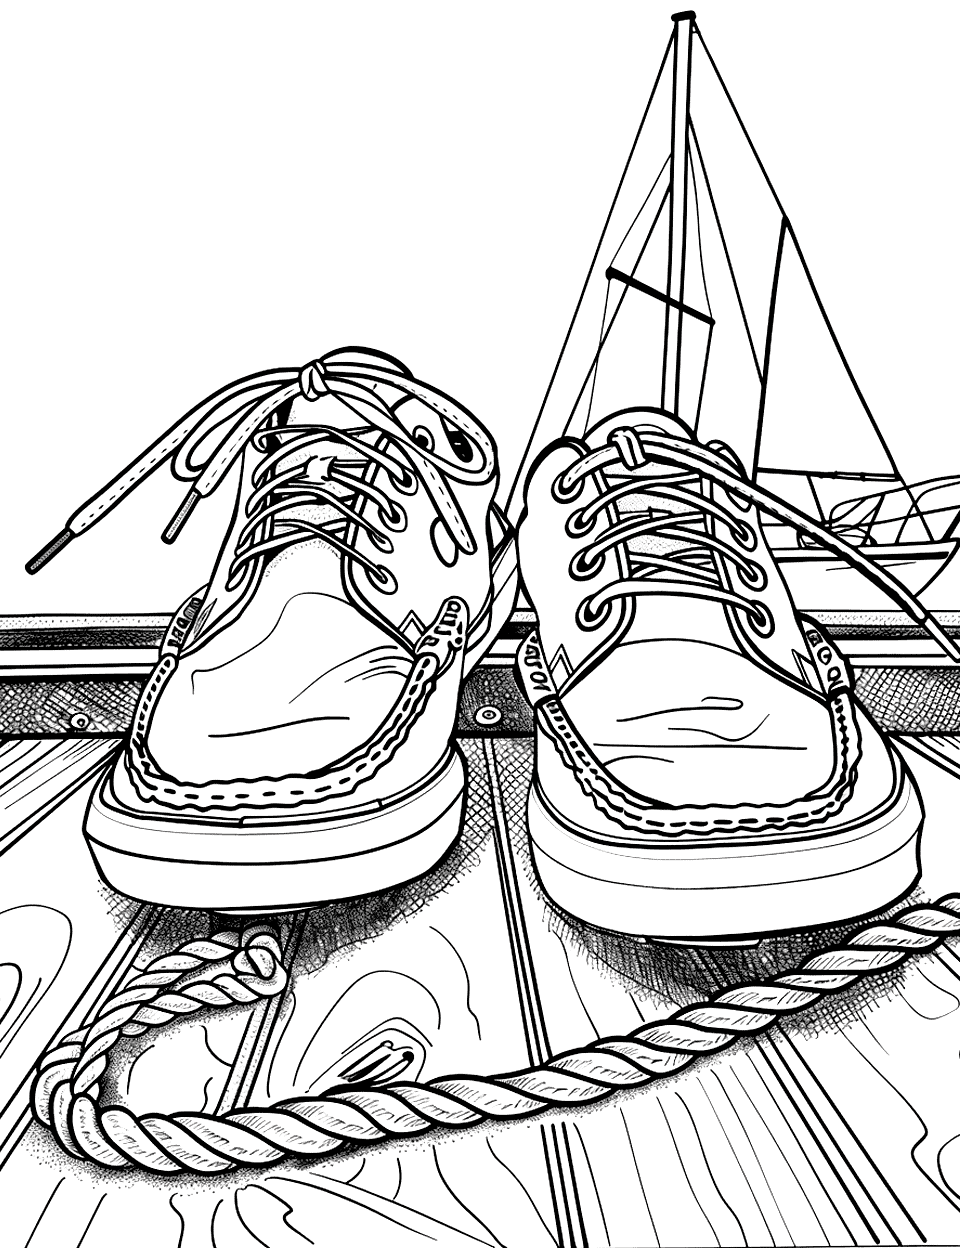 Boat Shoes on the Dock Shoe Coloring Page - Casual boat shoes with a nautical rope and a small model sailboat beside them.